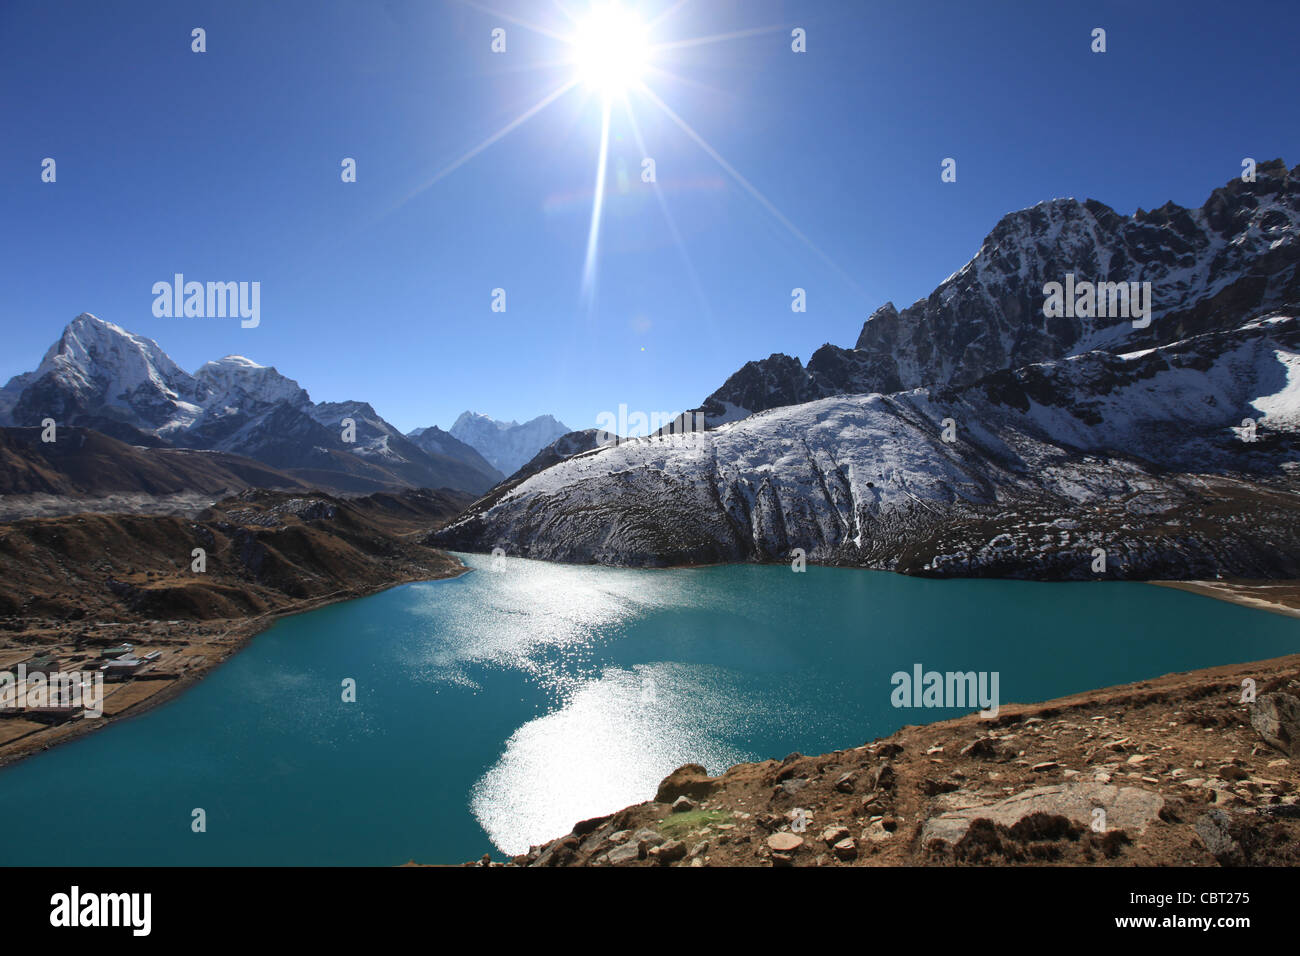 View of the Gokyo Valley Glacial Lake in the Himalayas Stock Photo